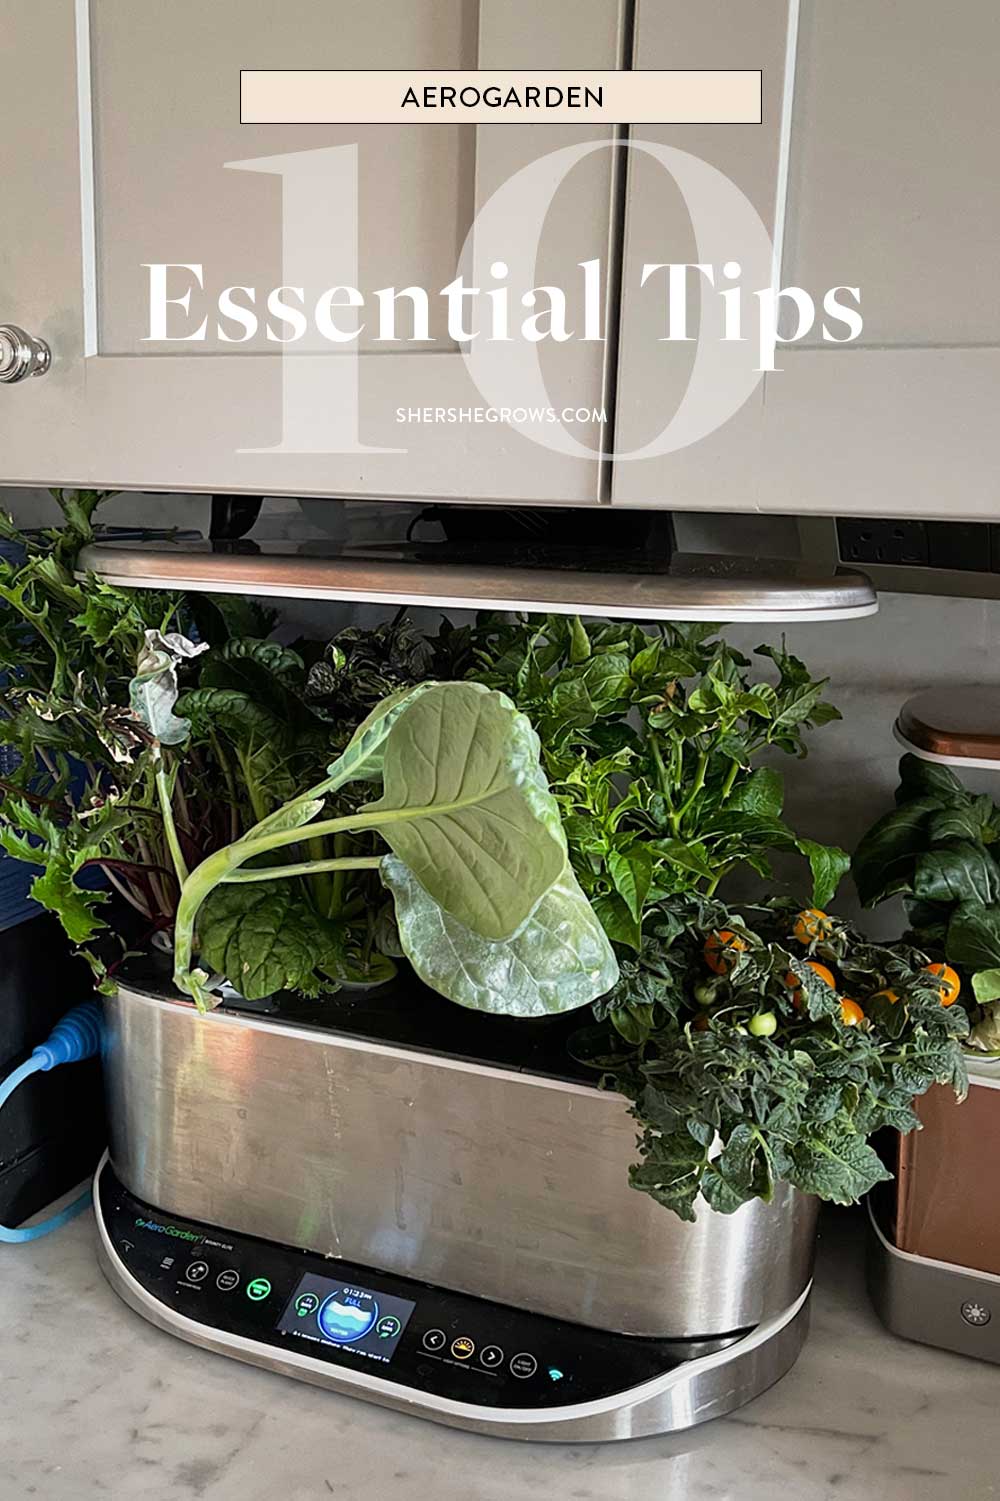 must-know-aerogarden-tips-for-beginners